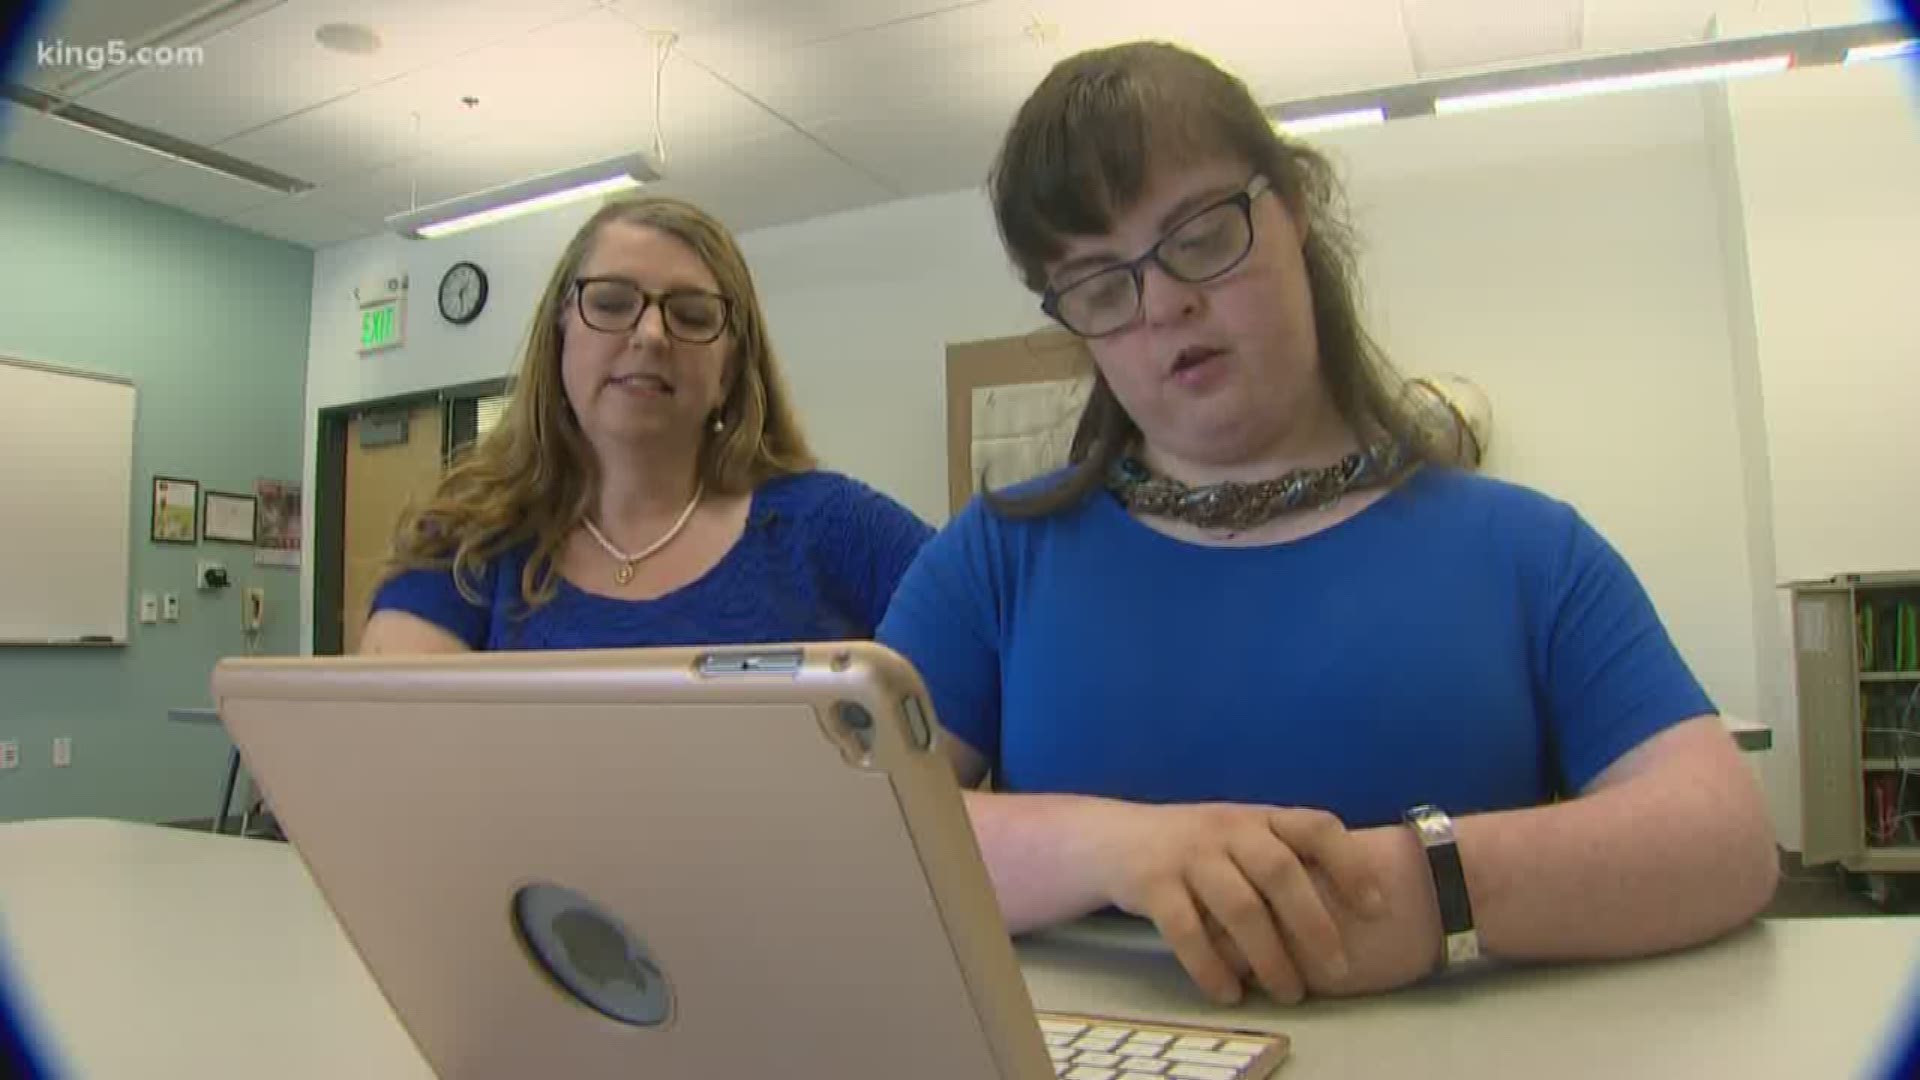 Students of all intellectual abilities can thrive at Skagit County College. KING 5's Chris Daniels reports.